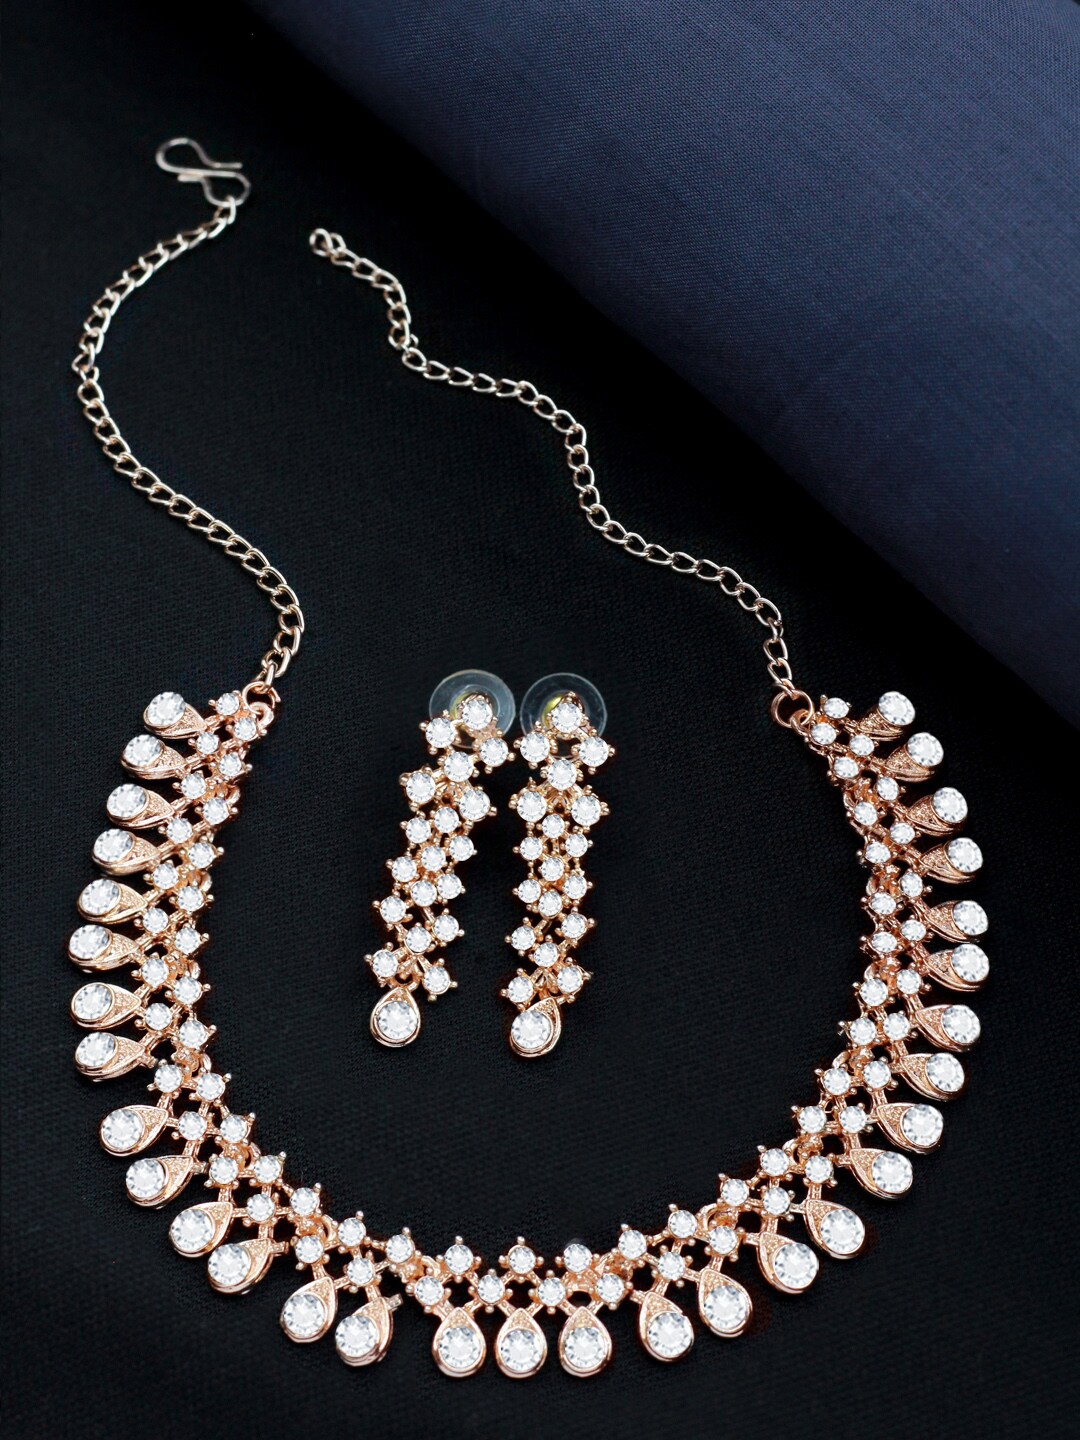 

SAIYONI Rose Gold-Plated Stone-Studded Choker Necklace & Earrings